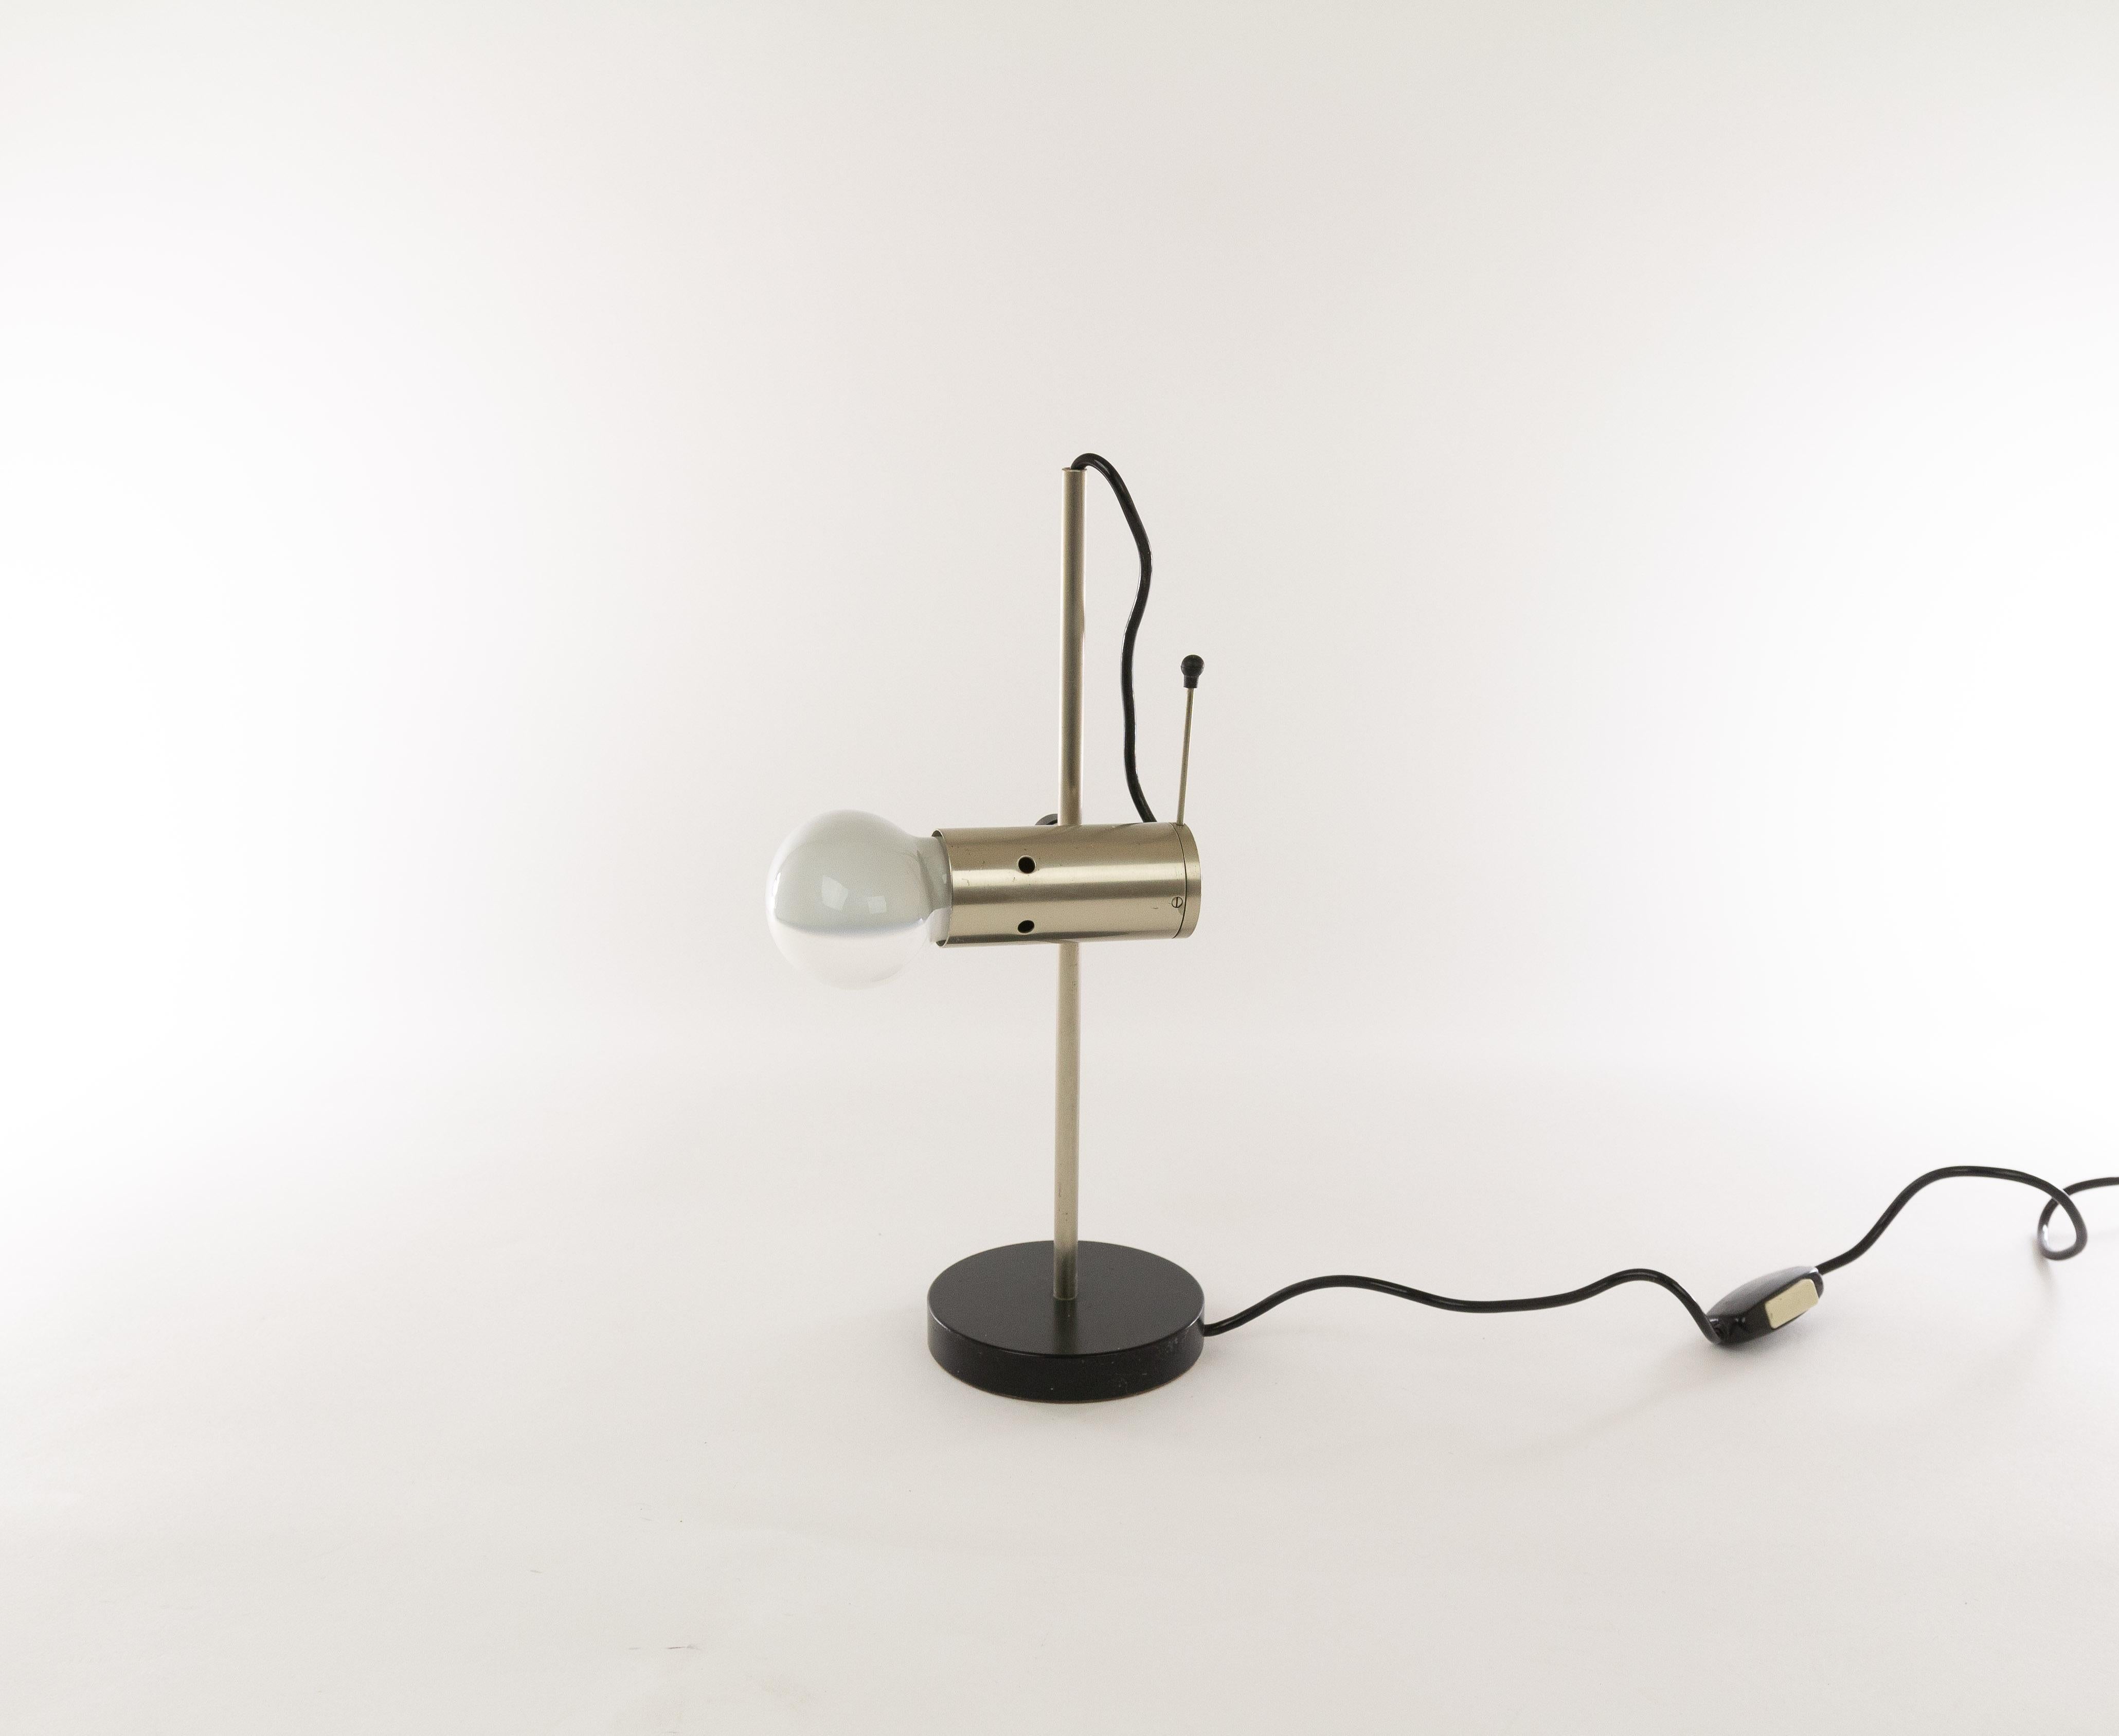 A metal Model 251 table lamp designed by Tito Agnoli and manufactured by O-Luce. Its remarkable design is from the 1950s.

This piece by Tito Agnoli features an original Cornalux light bulb capable of directing diffused light in a precise